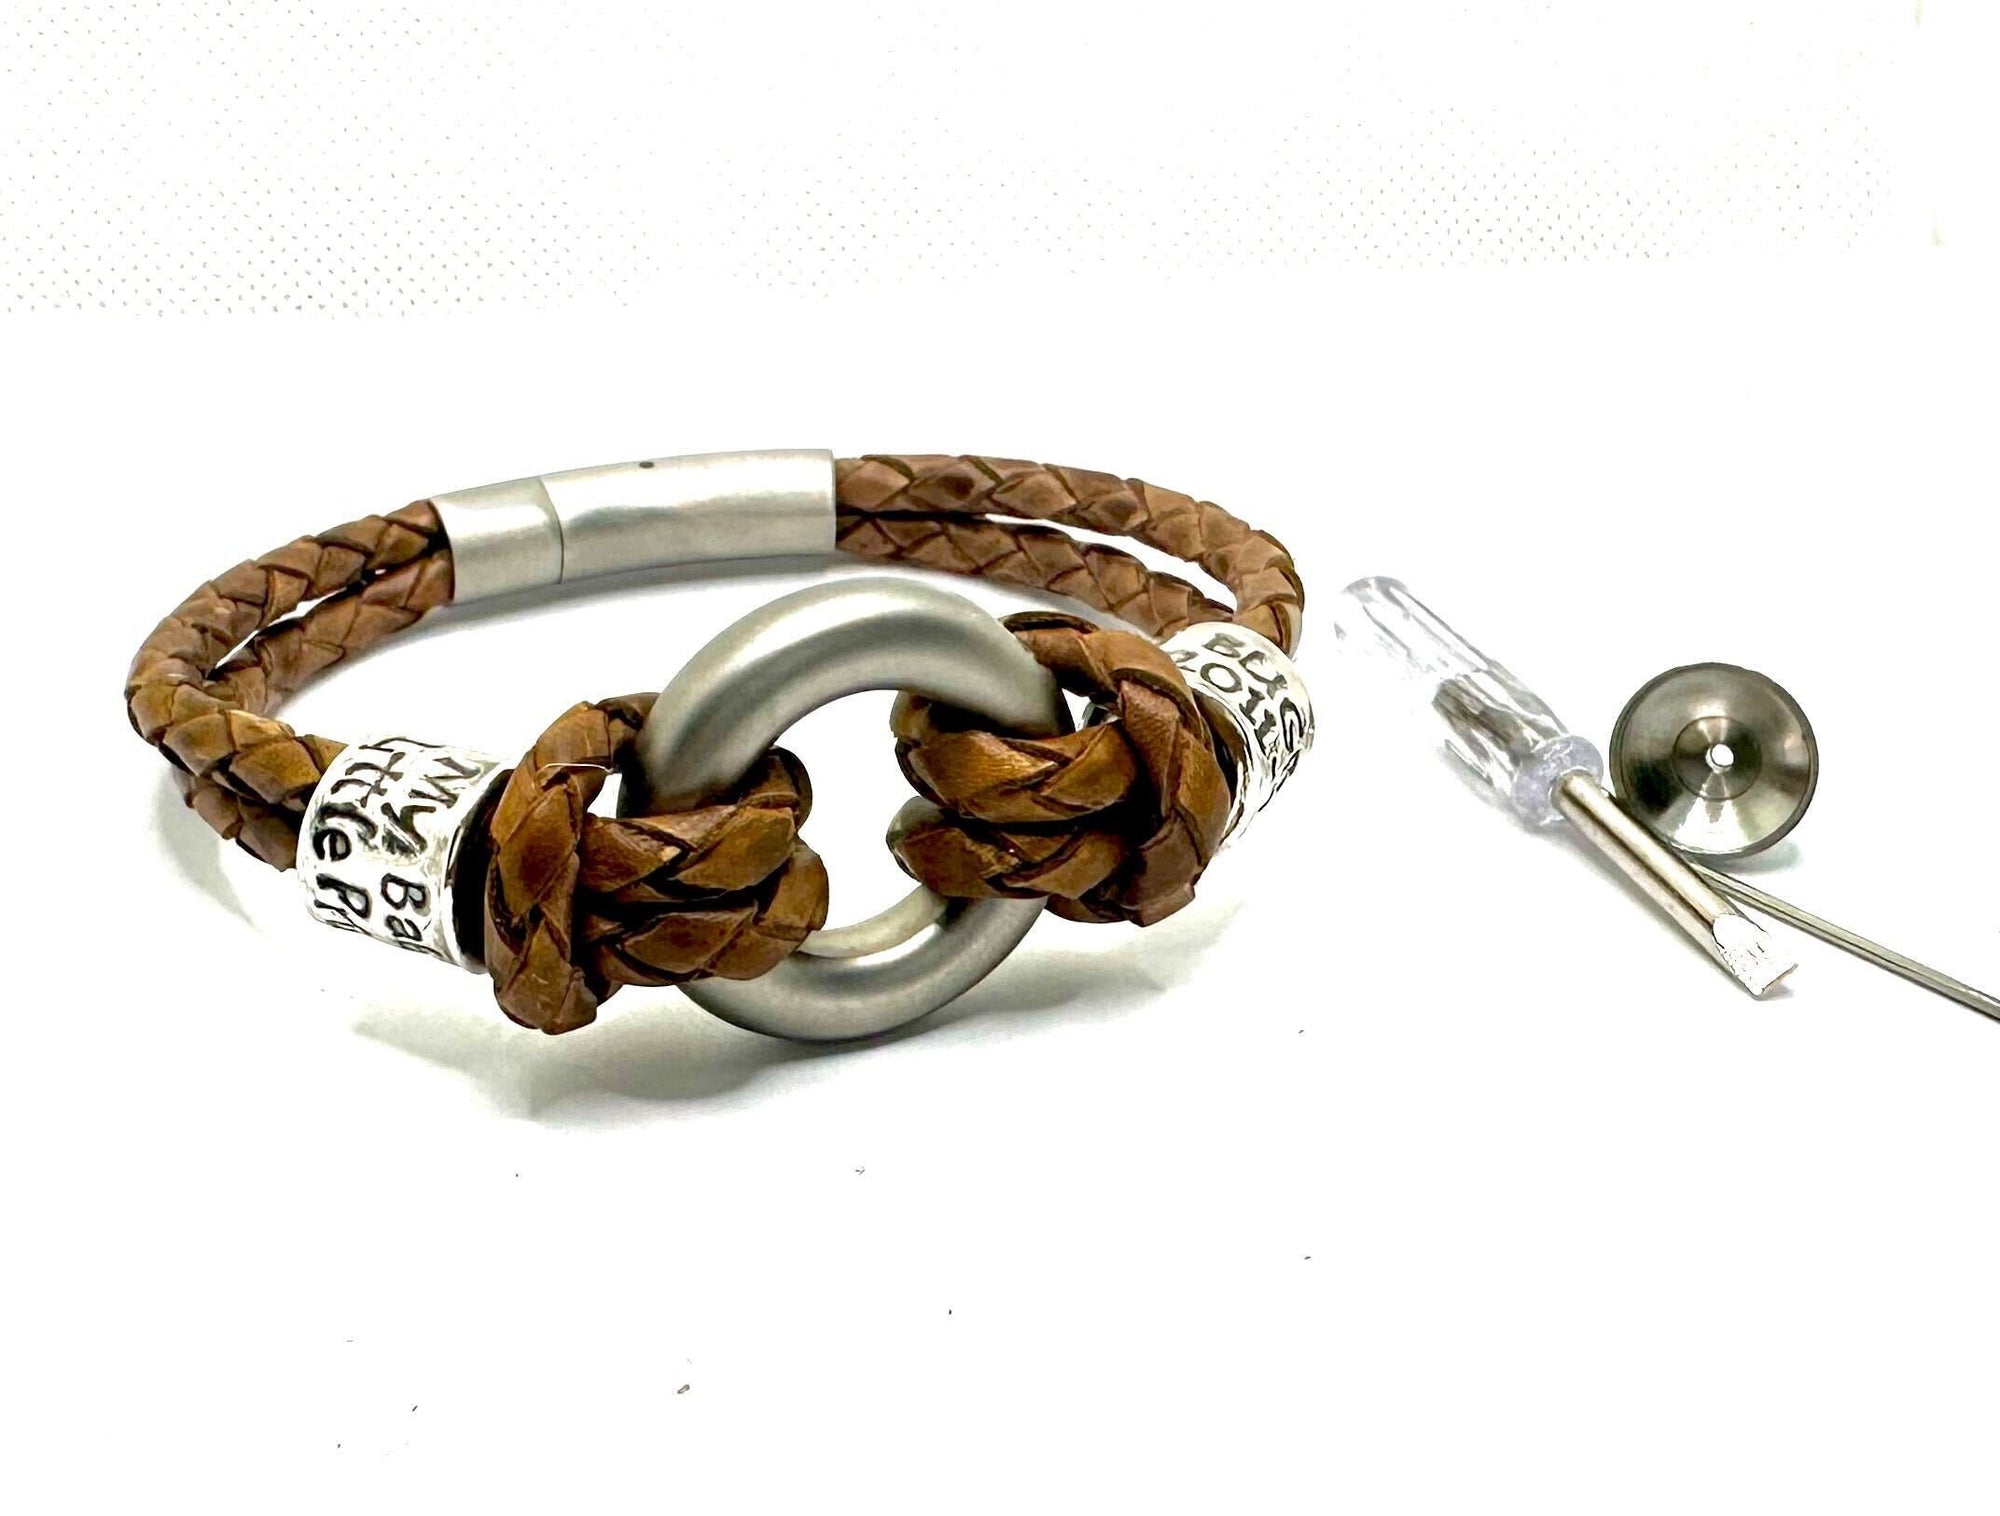 Personalised Braided Leather Double Cord Urn Bracelet for Ashes with Pure Silver Beads, Custom Engraved, Tan, Antique Brown or Black.